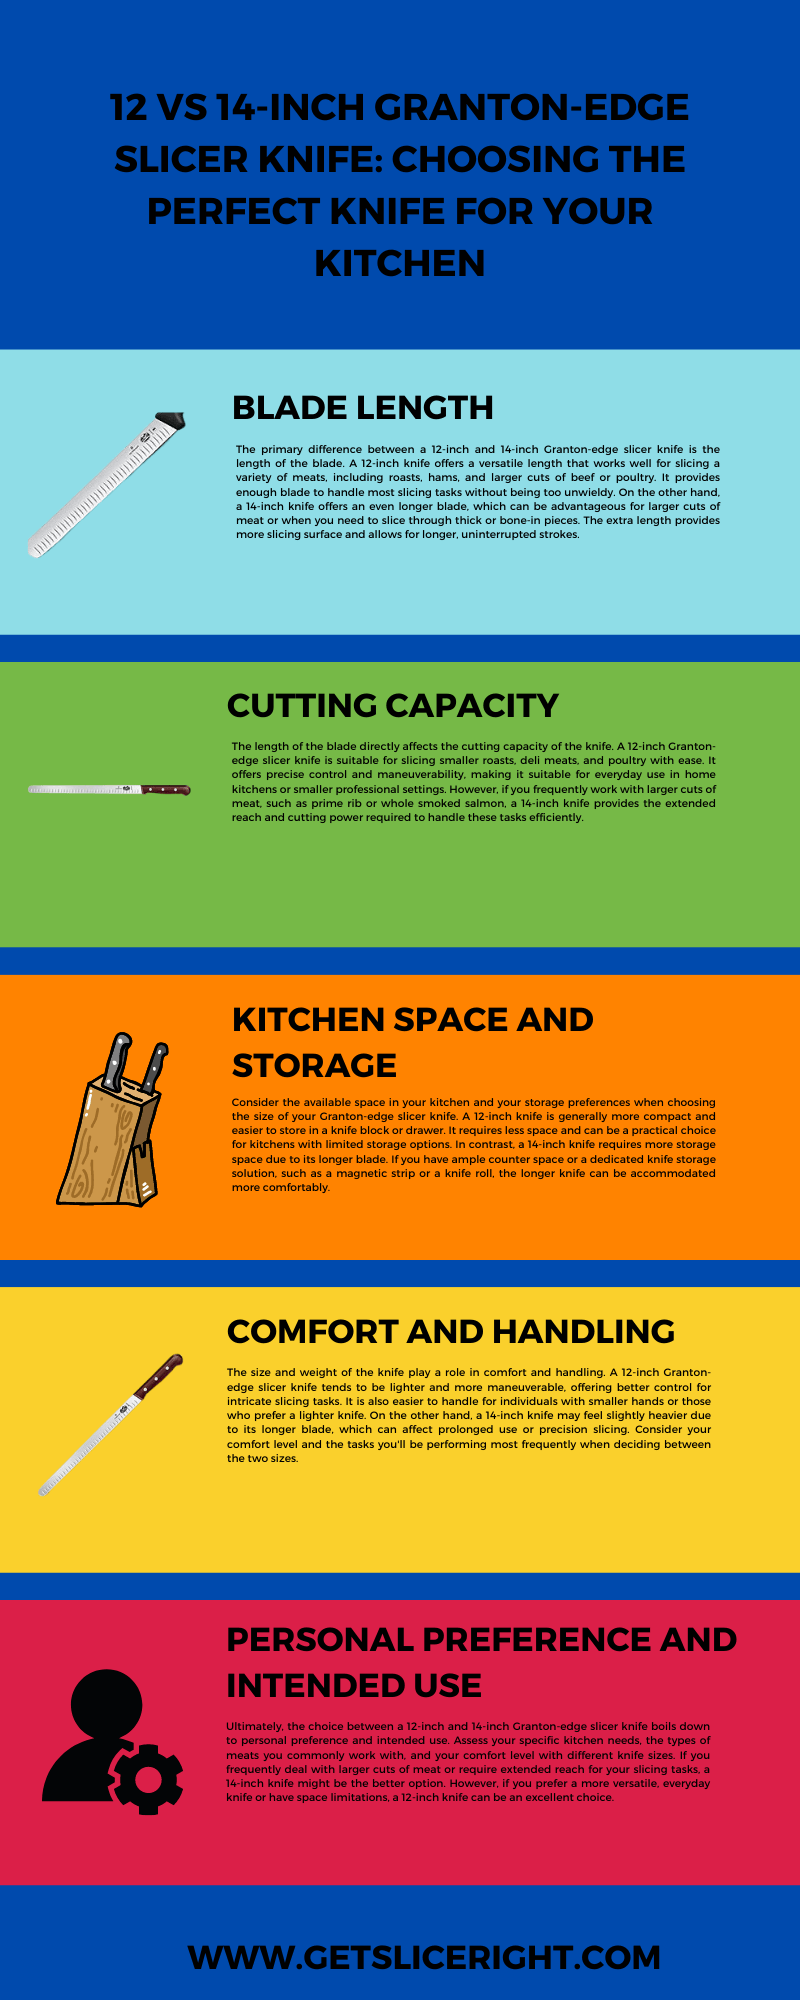 12 vs 14-inch granton-edge slicer knife choosing the perfect knife for your kitchen - infographic